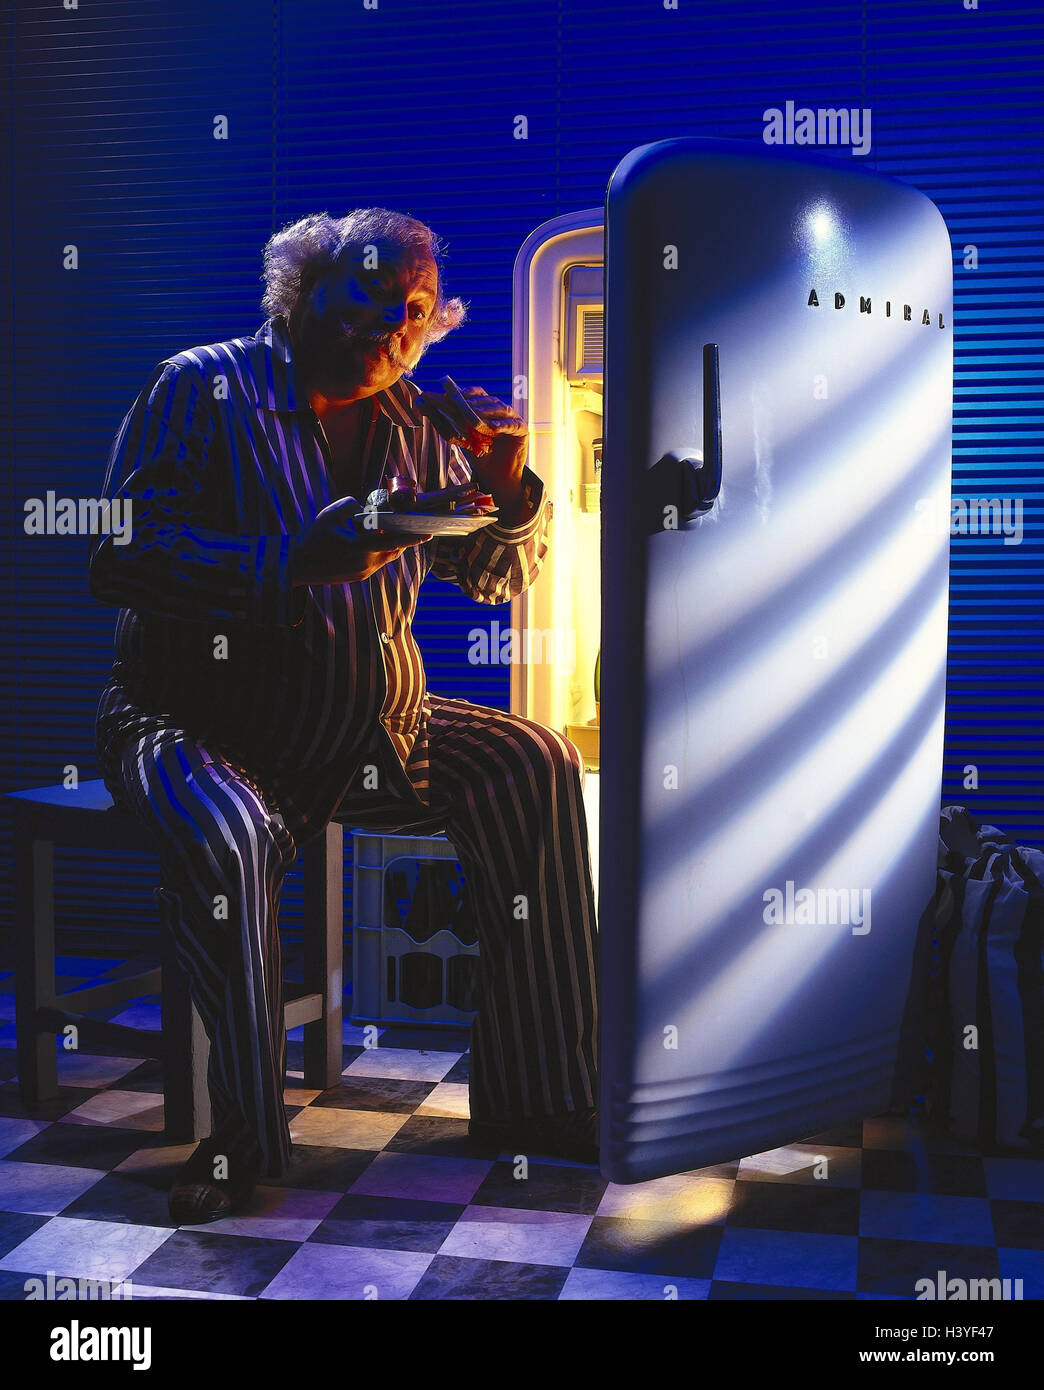 Senior, sleep suit, fridge, opened, sausage-meat sandwiches, eat, night, inside, man, old, cuisine, breads, books, food, secretly, sitomania, appetite, hunger, hungry, inconsistency, calories Stock Photo